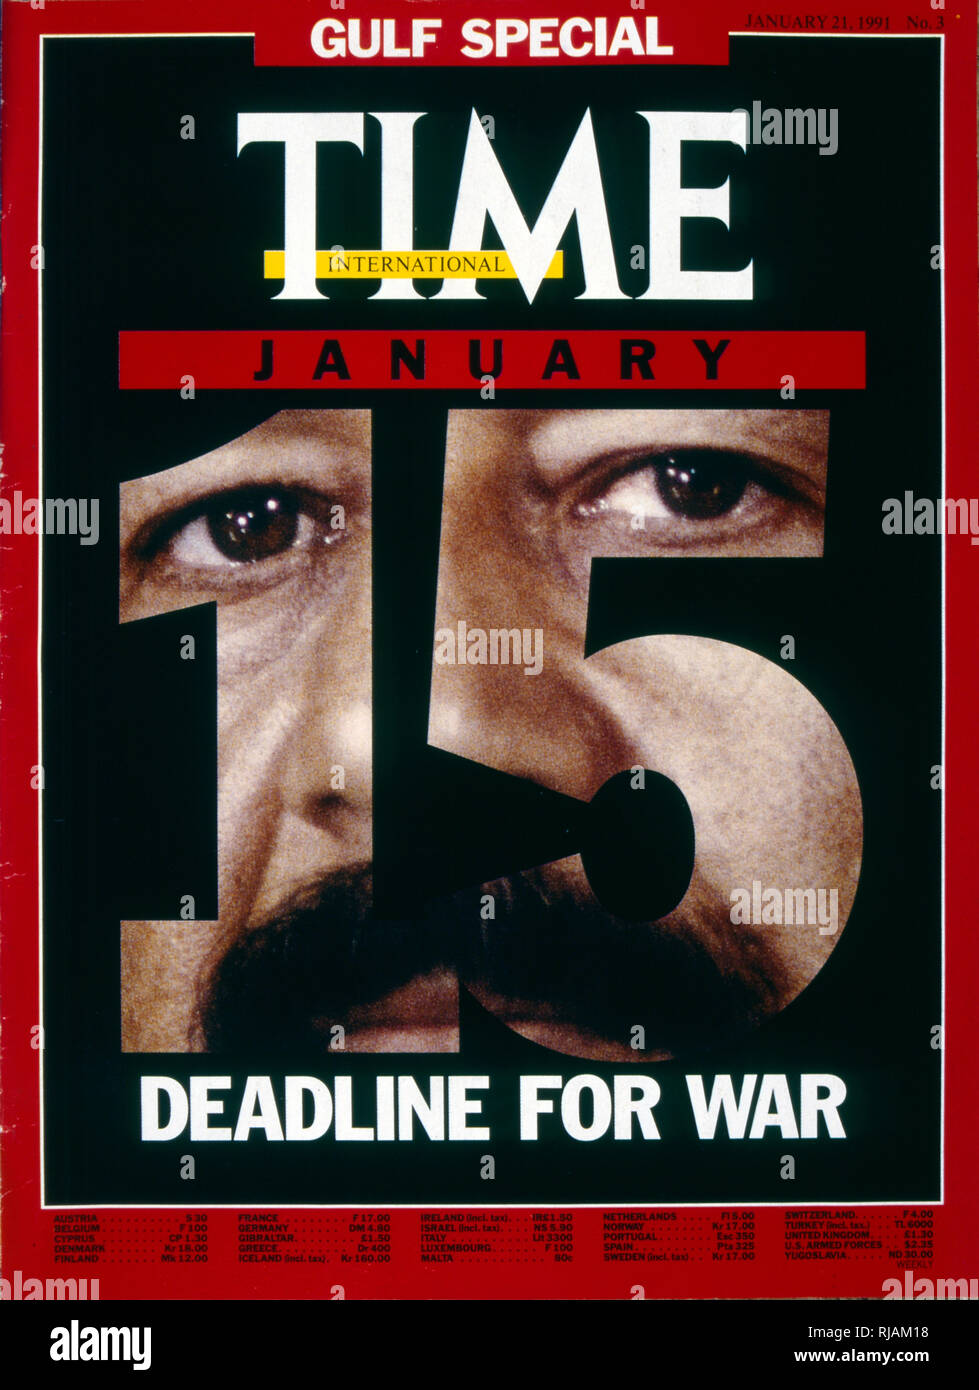 Front cover of  'Time ' magazine depicting Iraqi leader Saddam Hussein in the build up to the Gulf War, 21st January 1991. The Gulf War (2 August 1990 - 28 February 1991). codenamed Operation Desert Shield and Operation Desert Storm, the war waged by coalition forces from 35 nations led by the United States against Iraq in response to Iraq's invasion and annexation of Kuwait. Stock Photo